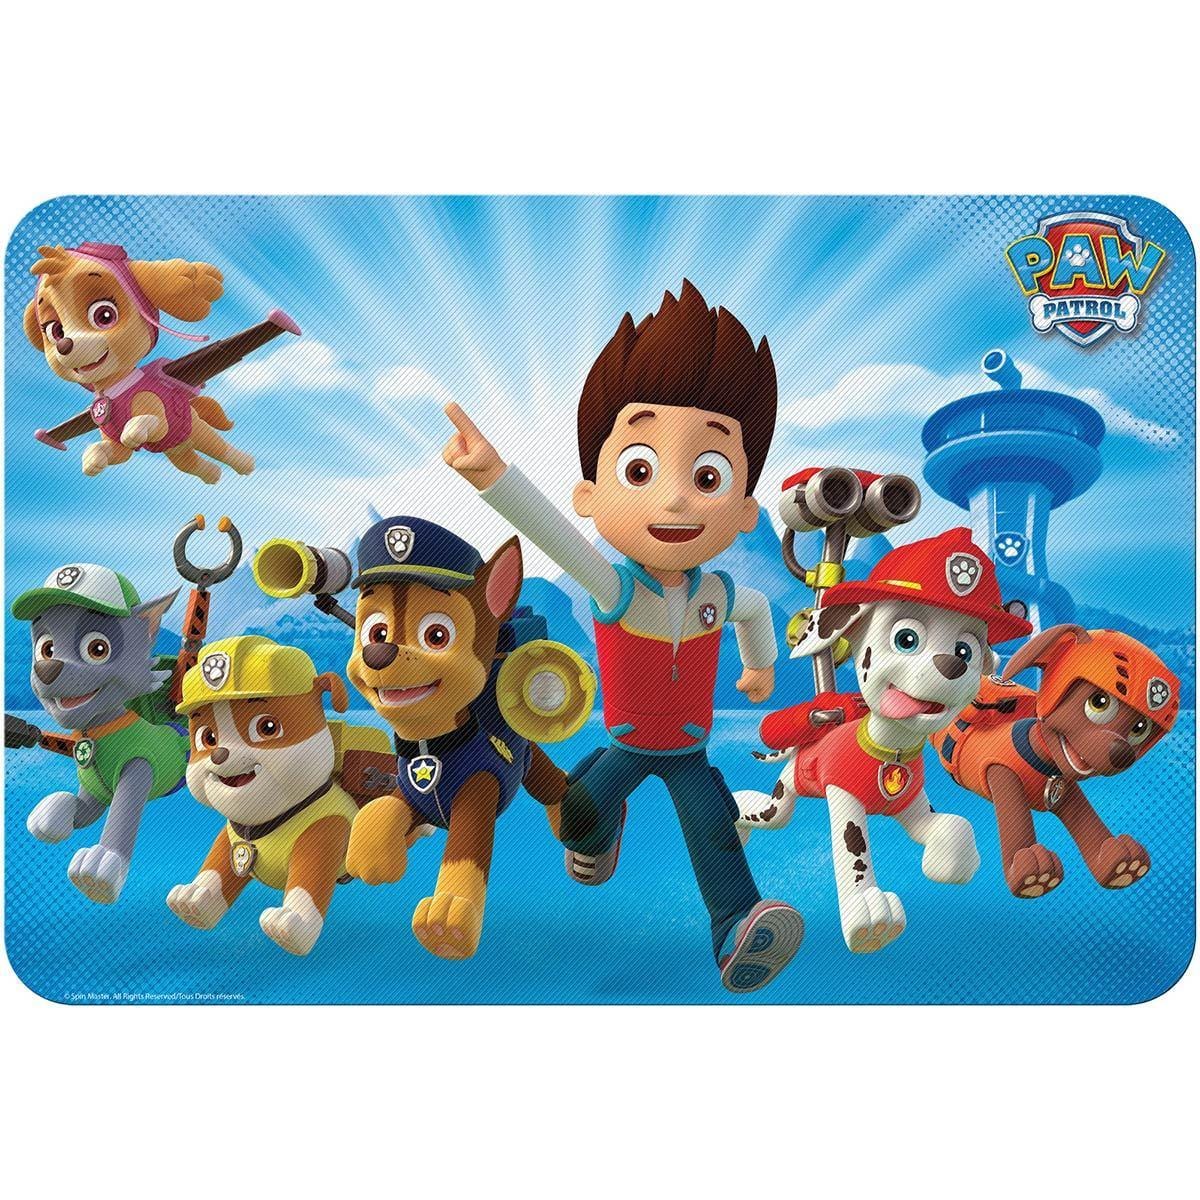 Buy Kids Birthday Paw Patrol placemat sold at Party Expert